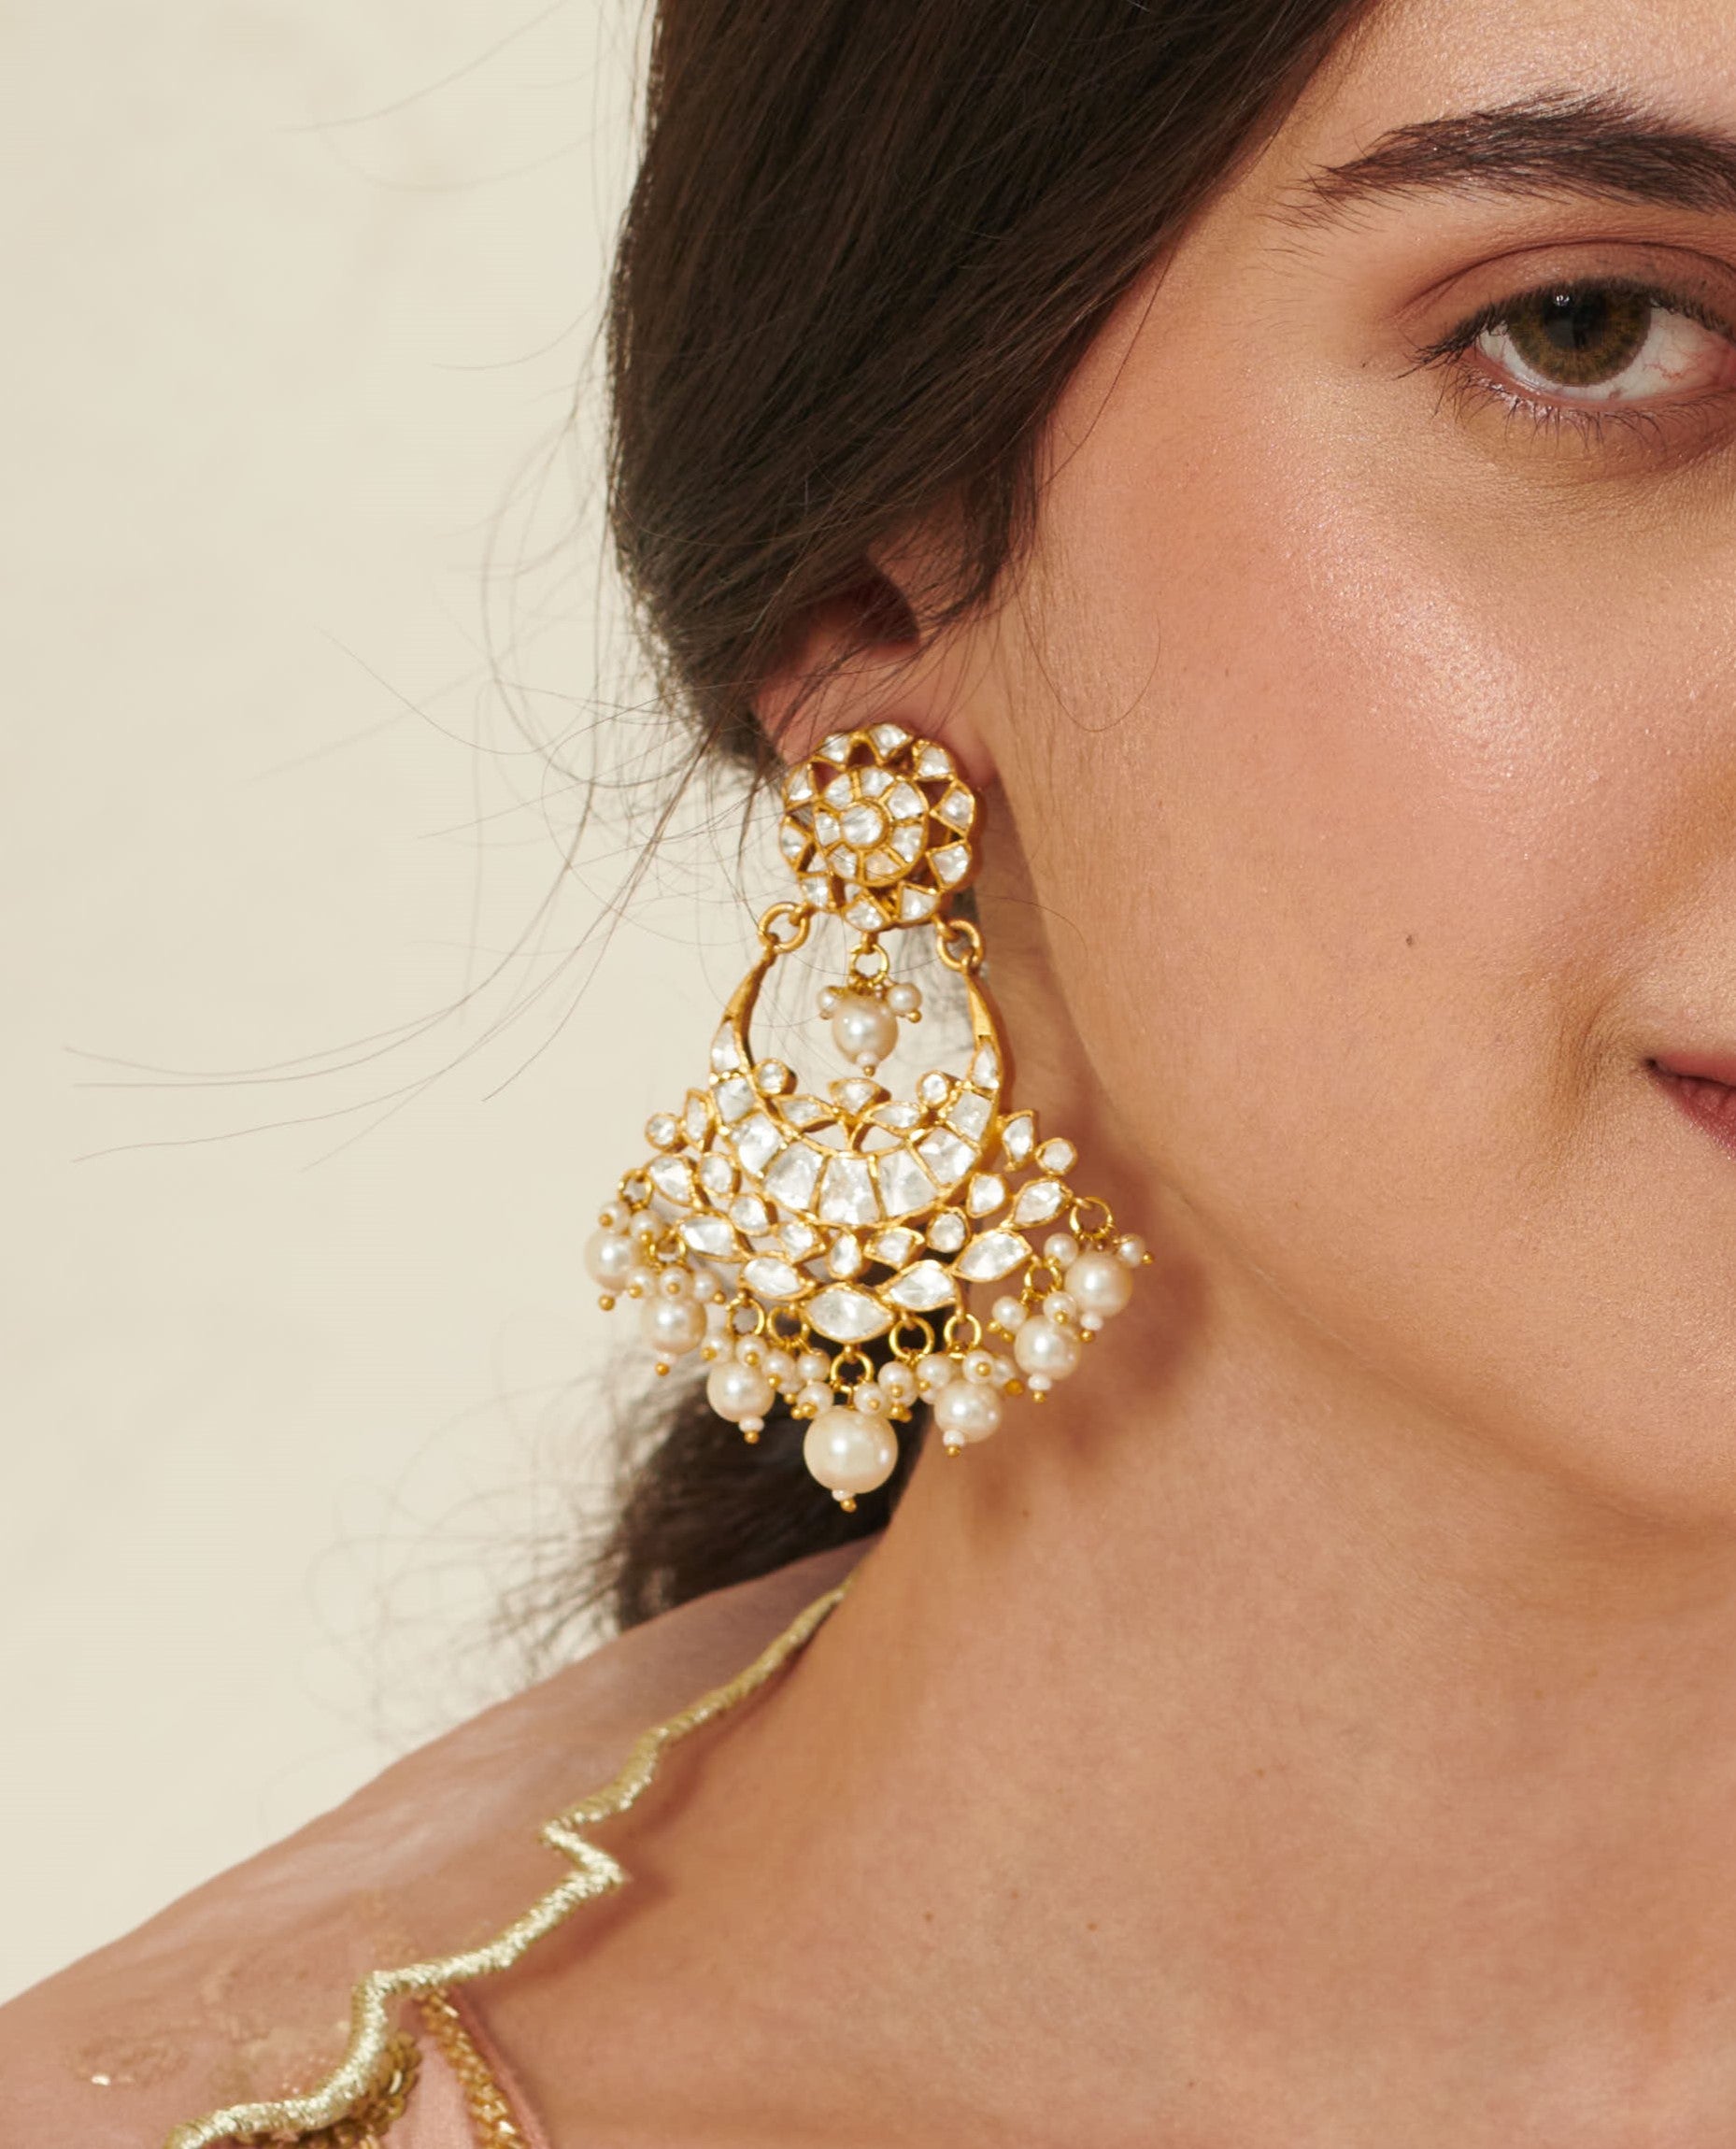 Featuring an 18kt gold plated 92.5 silver Vellore polki moon motif Chaandbali earring with fresh water pearls drops.